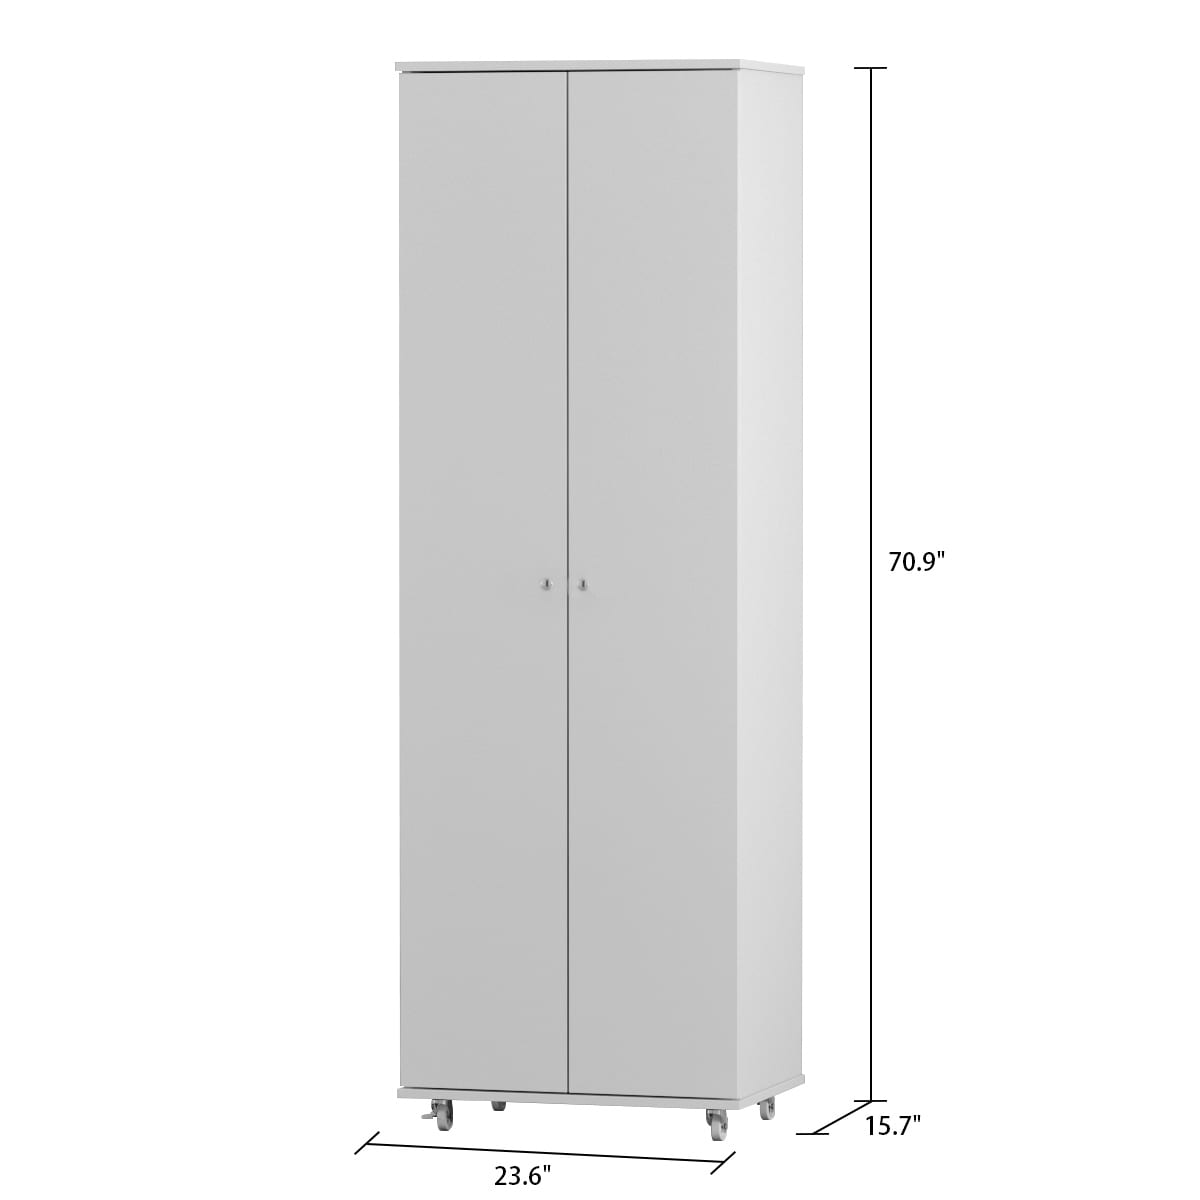 https://ak1.ostkcdn.com/images/products/is/images/direct/60ead1e4561a8f0b5595c596d9e30d60486b205b/FAMAPY-71%22H-Tall-Storage-Cabinet%2C-8-Tier-Shoe-Rack-with-Wheels.jpg